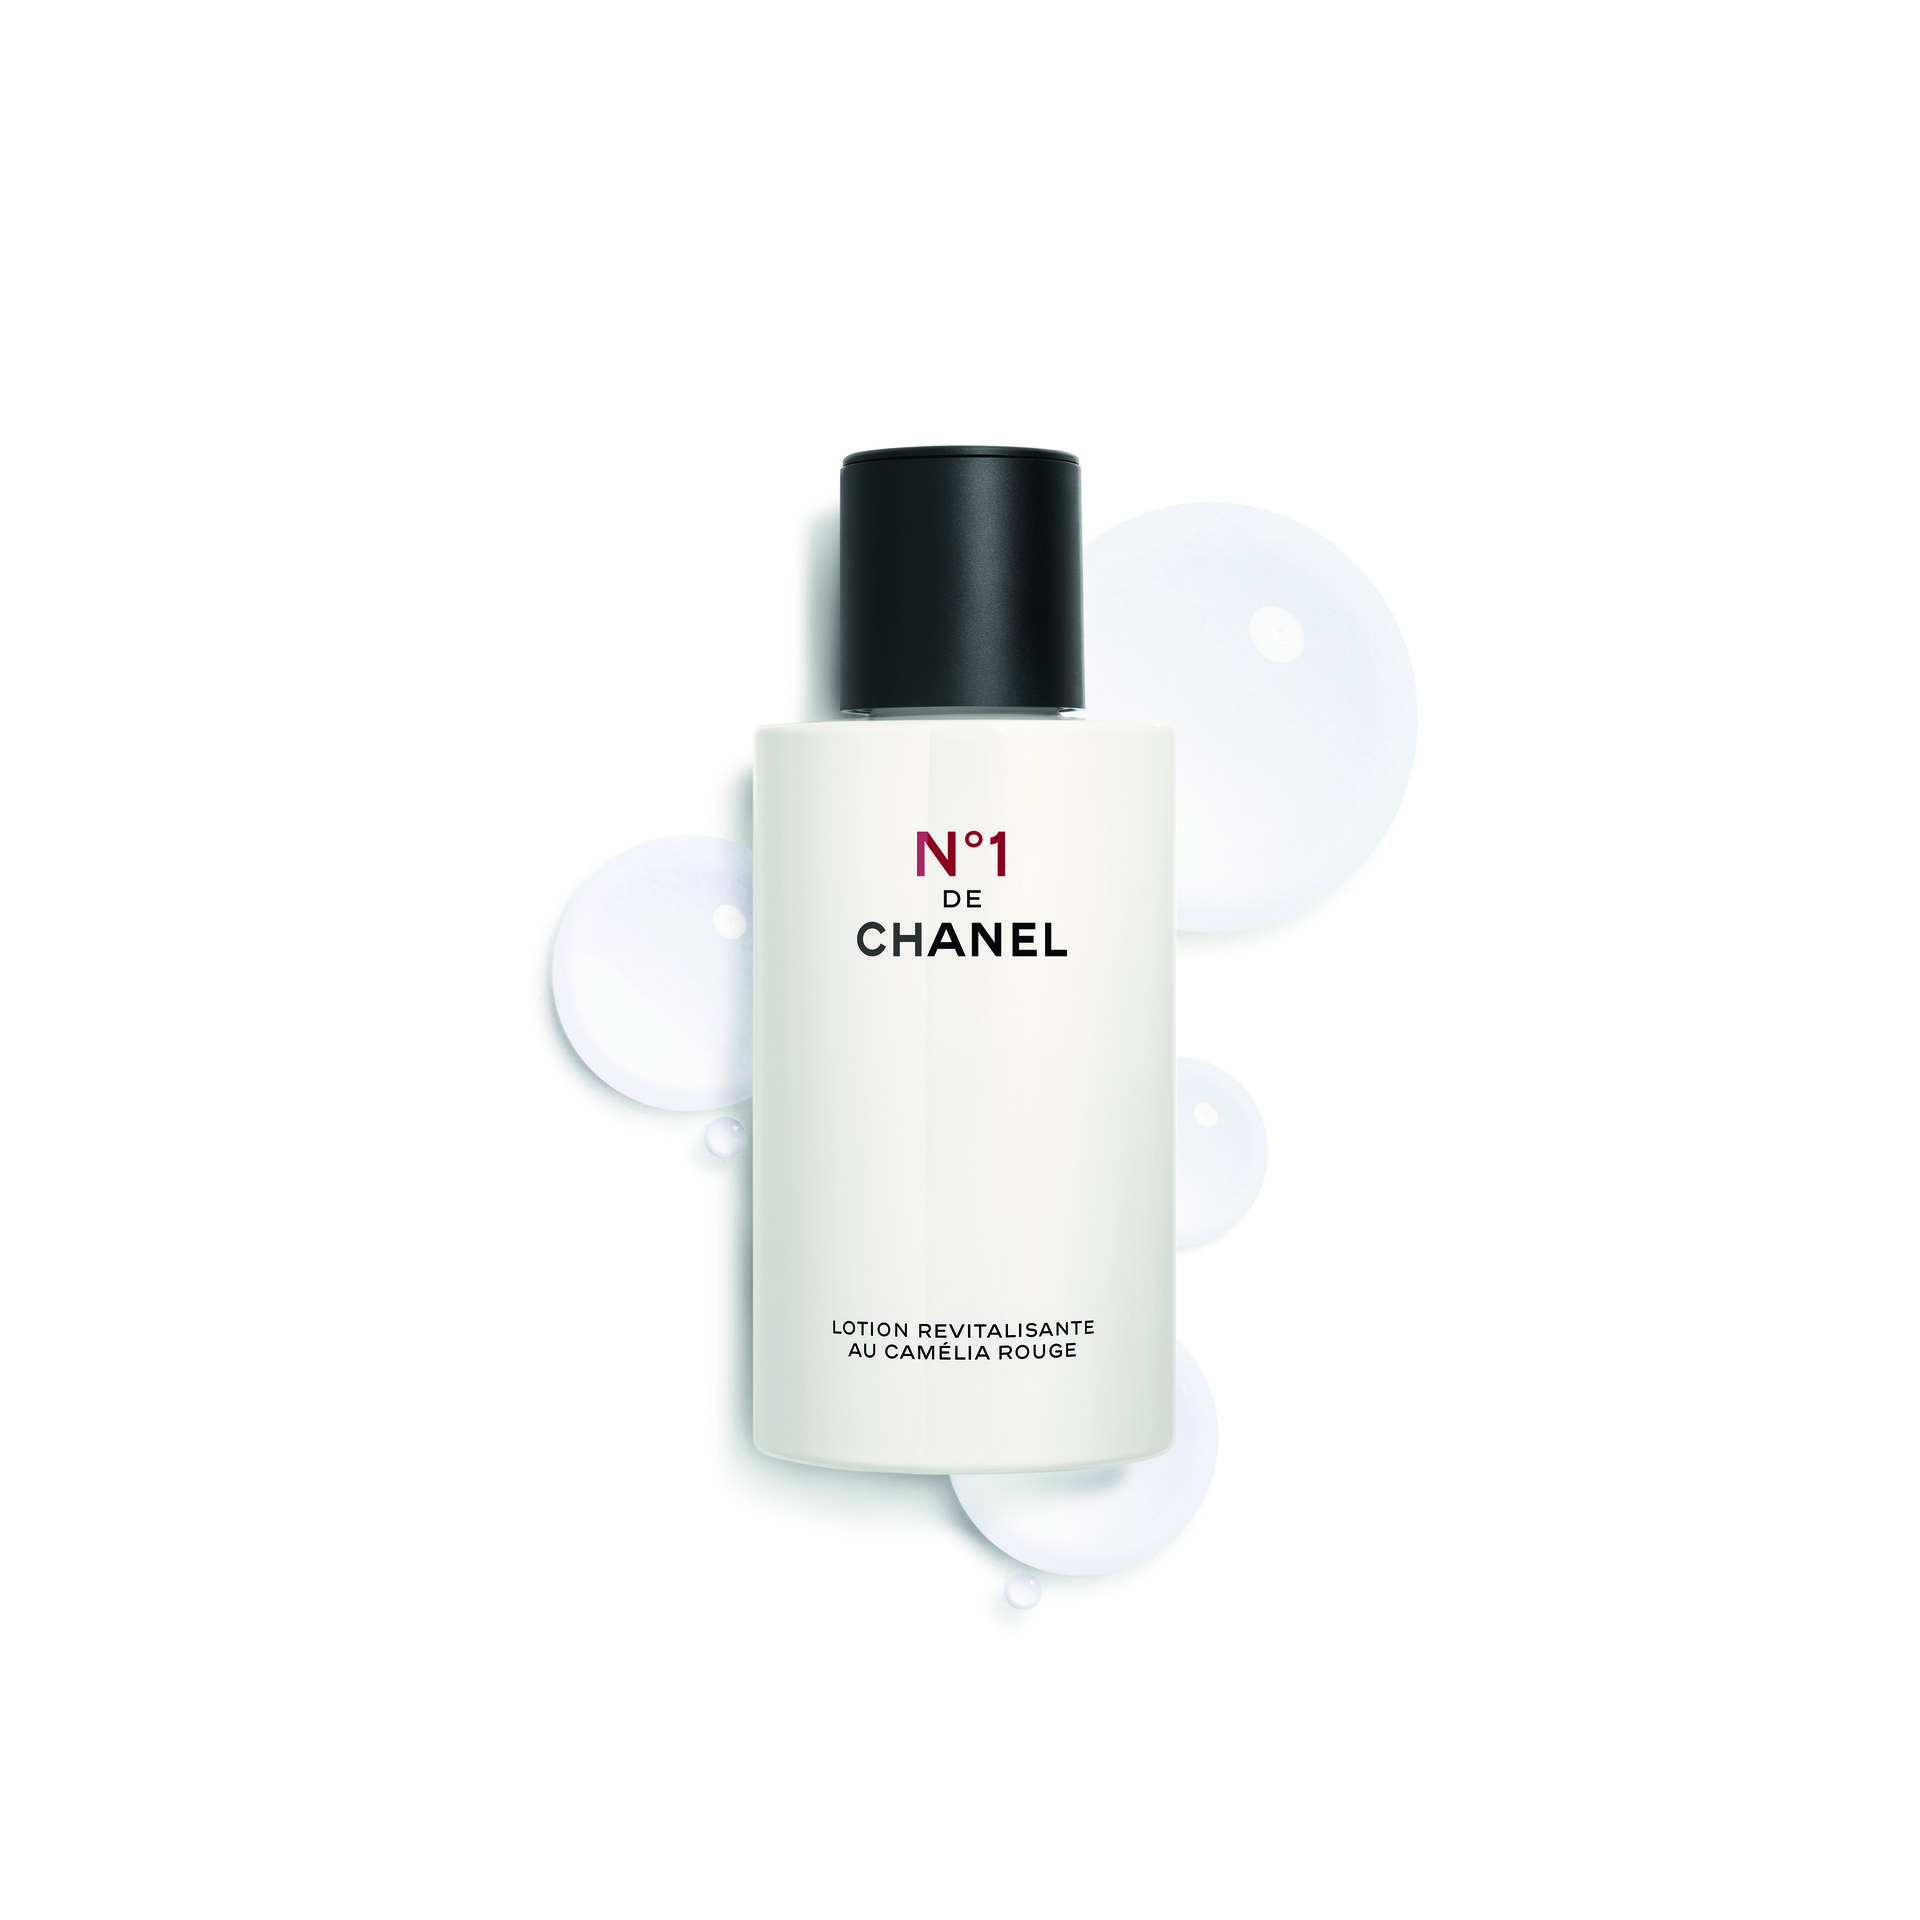 We Review The New, Sustainable N°1 de CHANEL Beauty Line